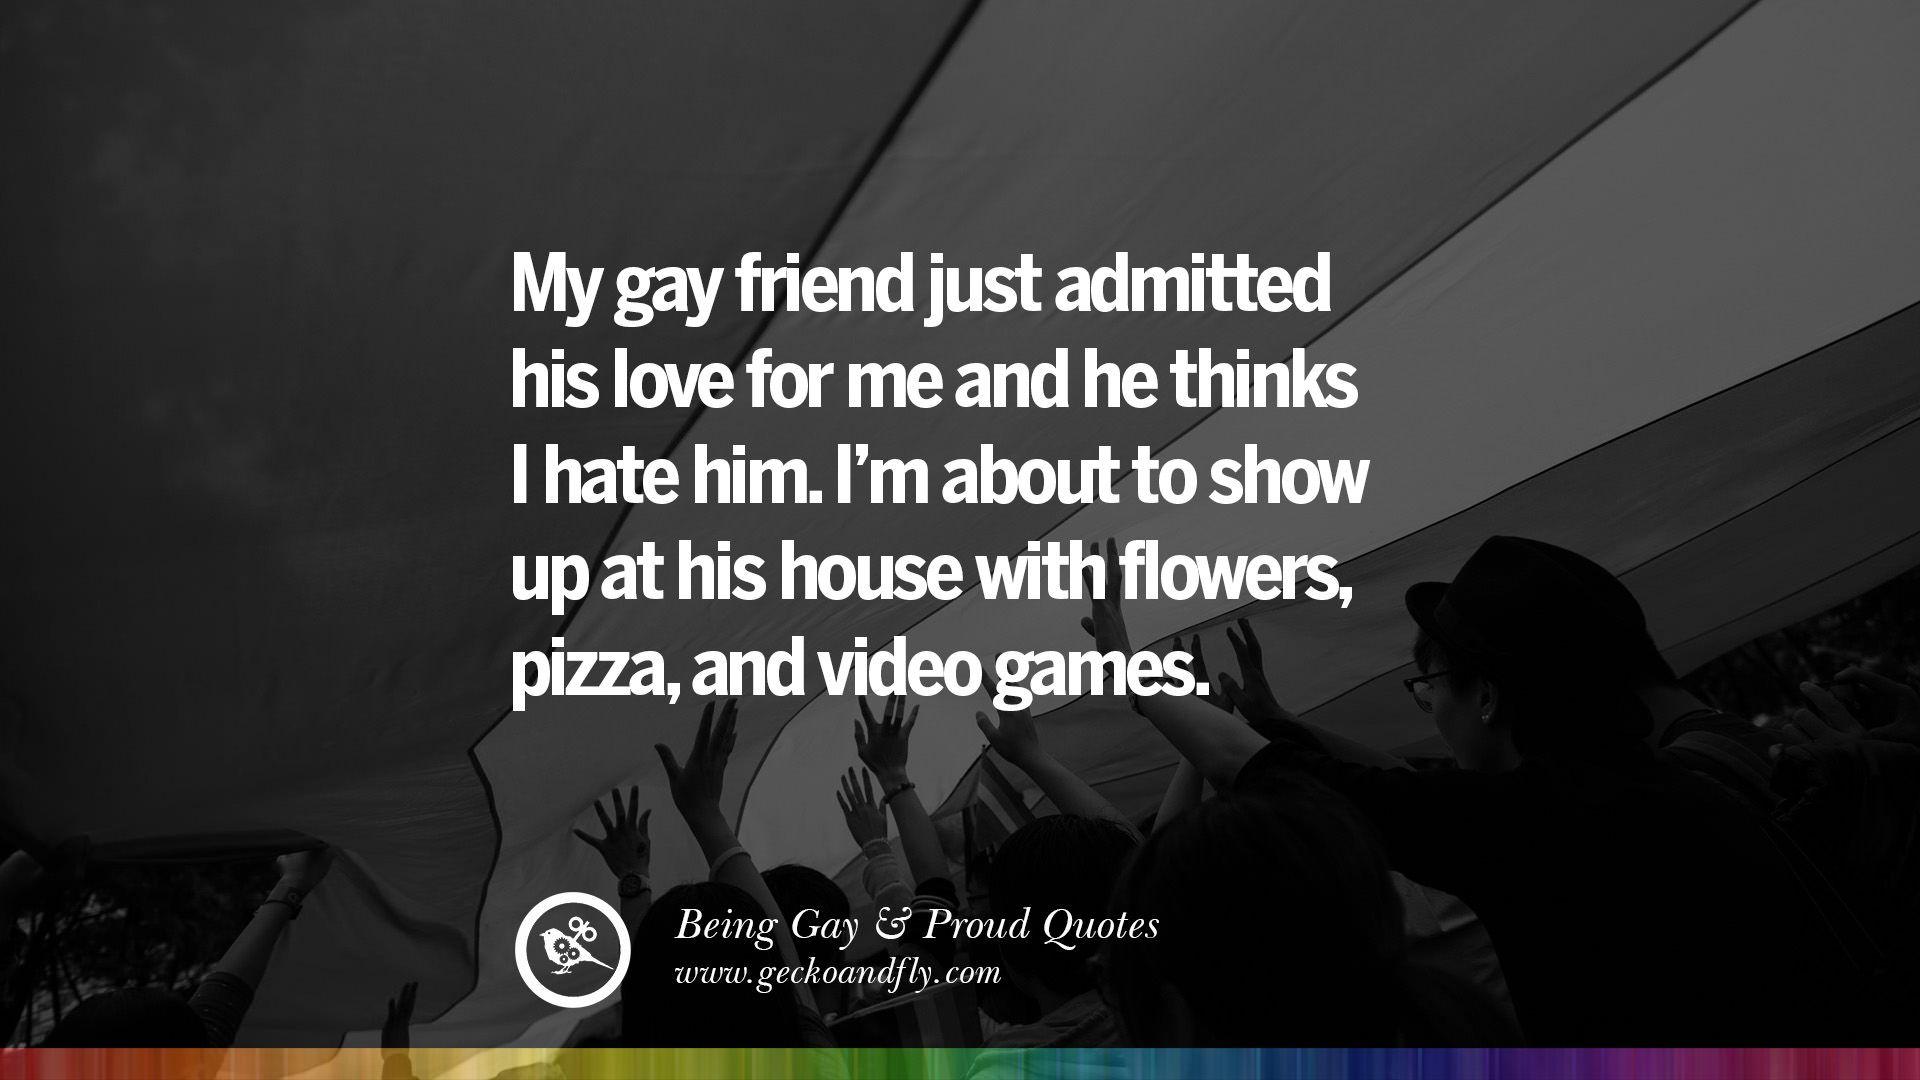 4244 Gay Quotes Images Stock Photos  Vectors  Shutterstock